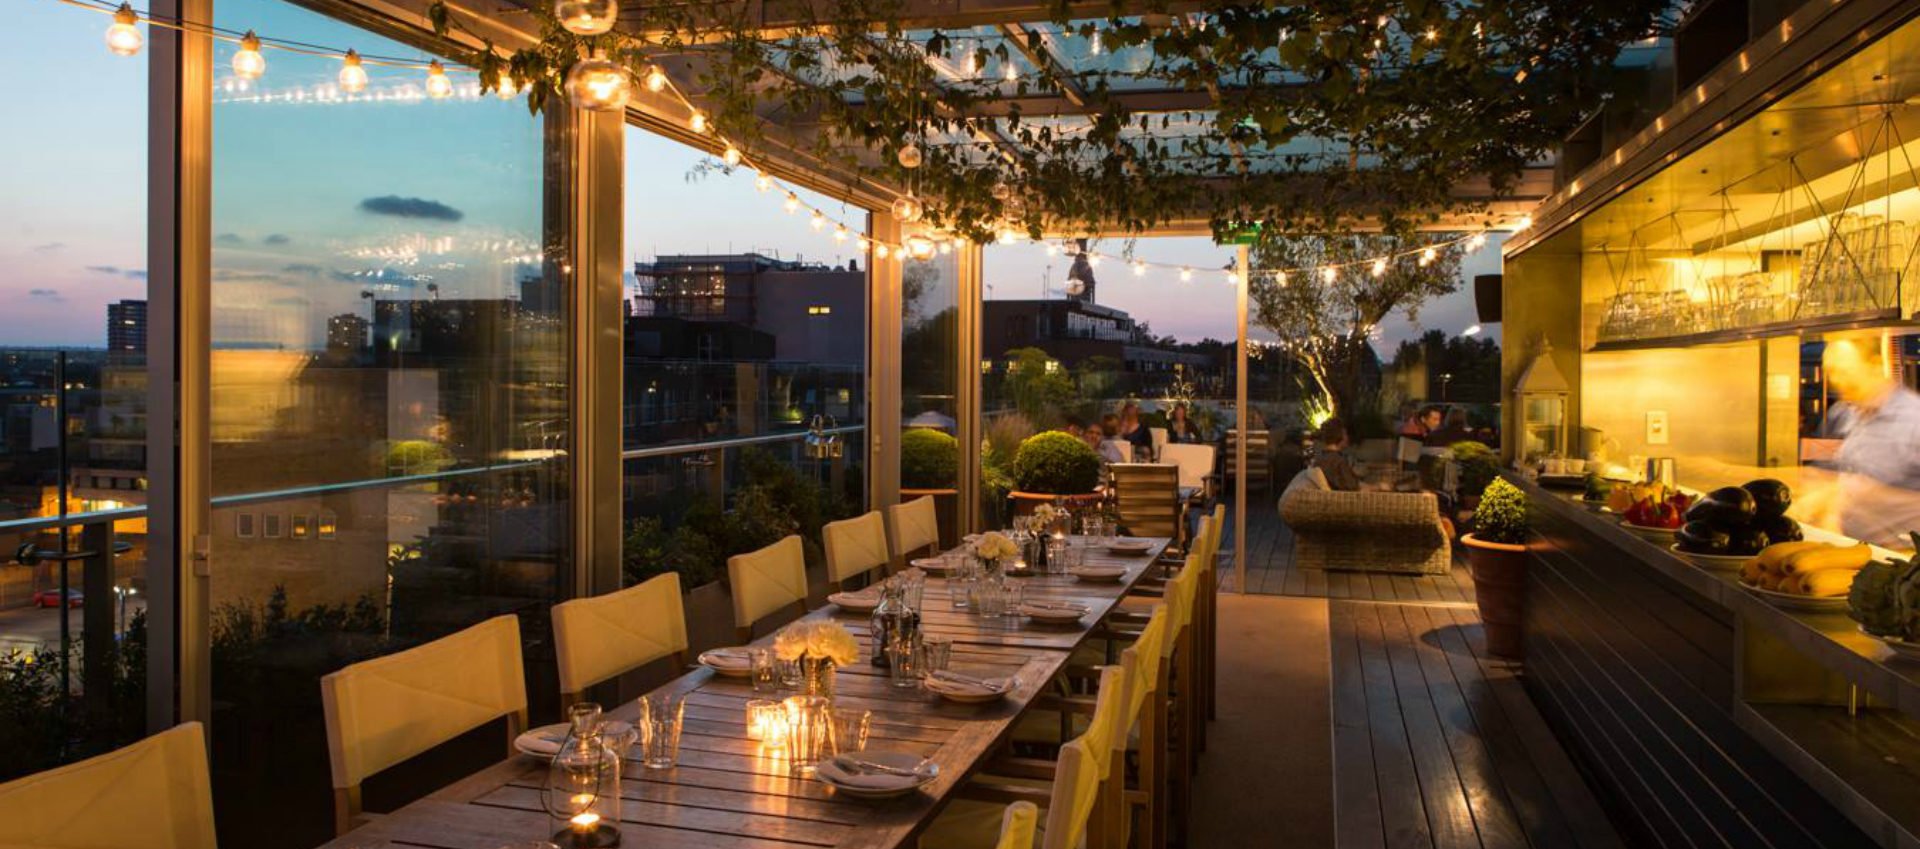 Boundary Rooftop | Romantic Rooftop Bar & Grill Restaurant In Shoreditch